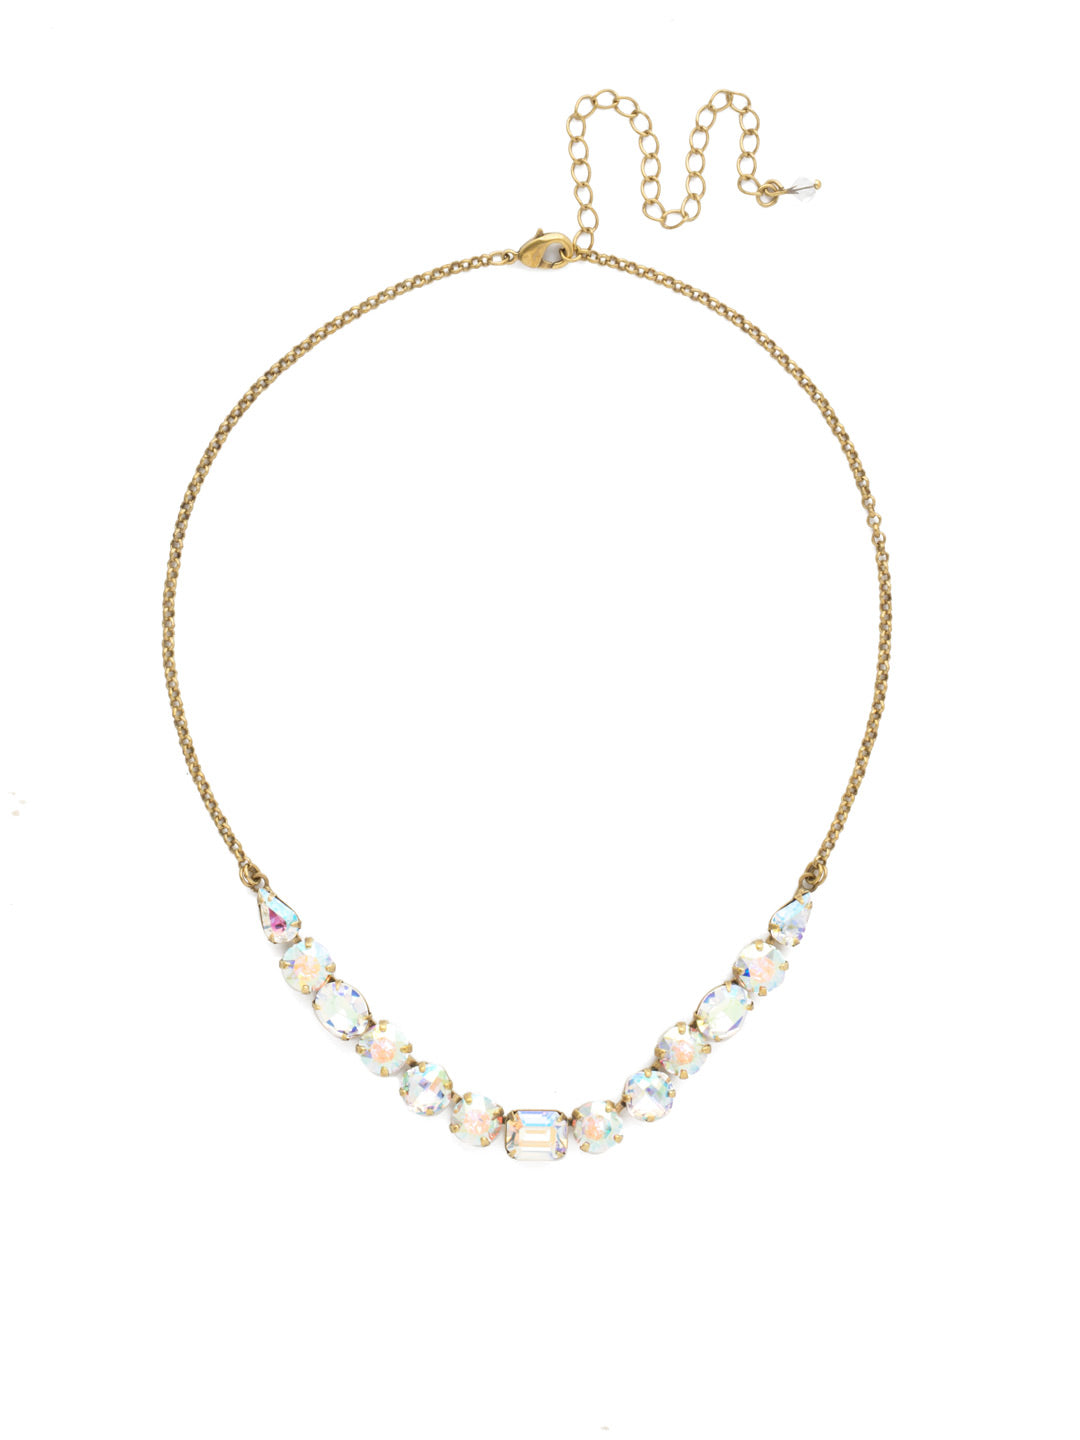 Tansy Half Line Tennis Necklace - NDQ14AGSNF - Oval, round, emerald, pear and cushion cut crystals are accented by a delicate chain for subtle sparkle that looks great layered or worn solo. From Sorrelli's Snowflake collection in our Antique Gold-tone finish.